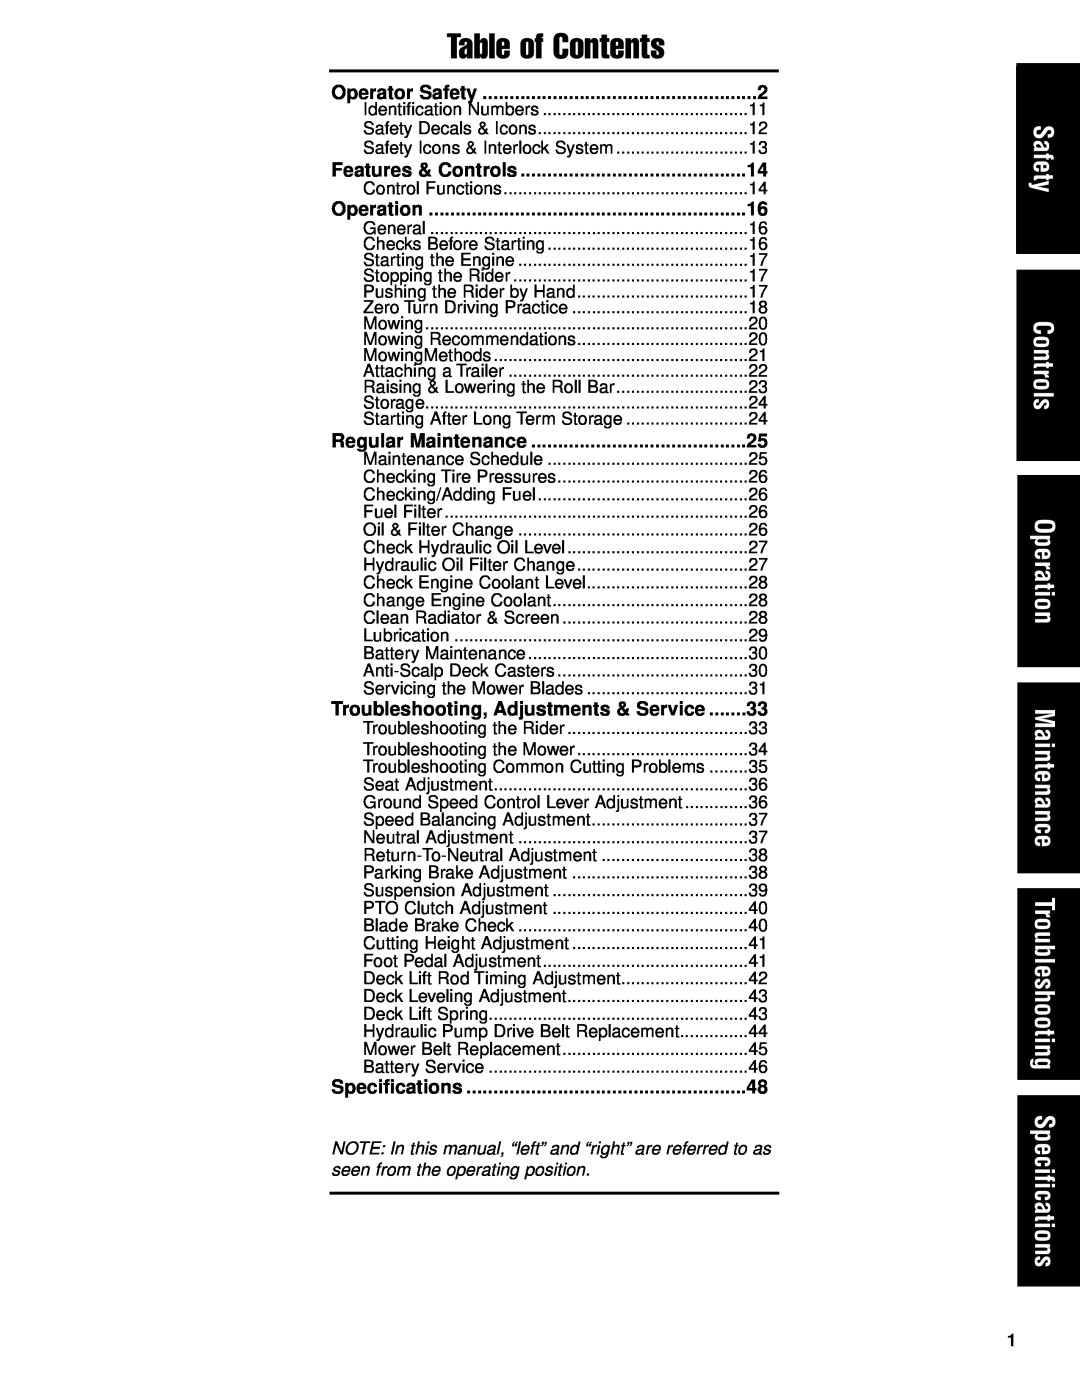 Briggs & Stratton 5900717, 5901186 Table of Contents, Safety Controls Operation Maintenance Troubleshooting Specifications 